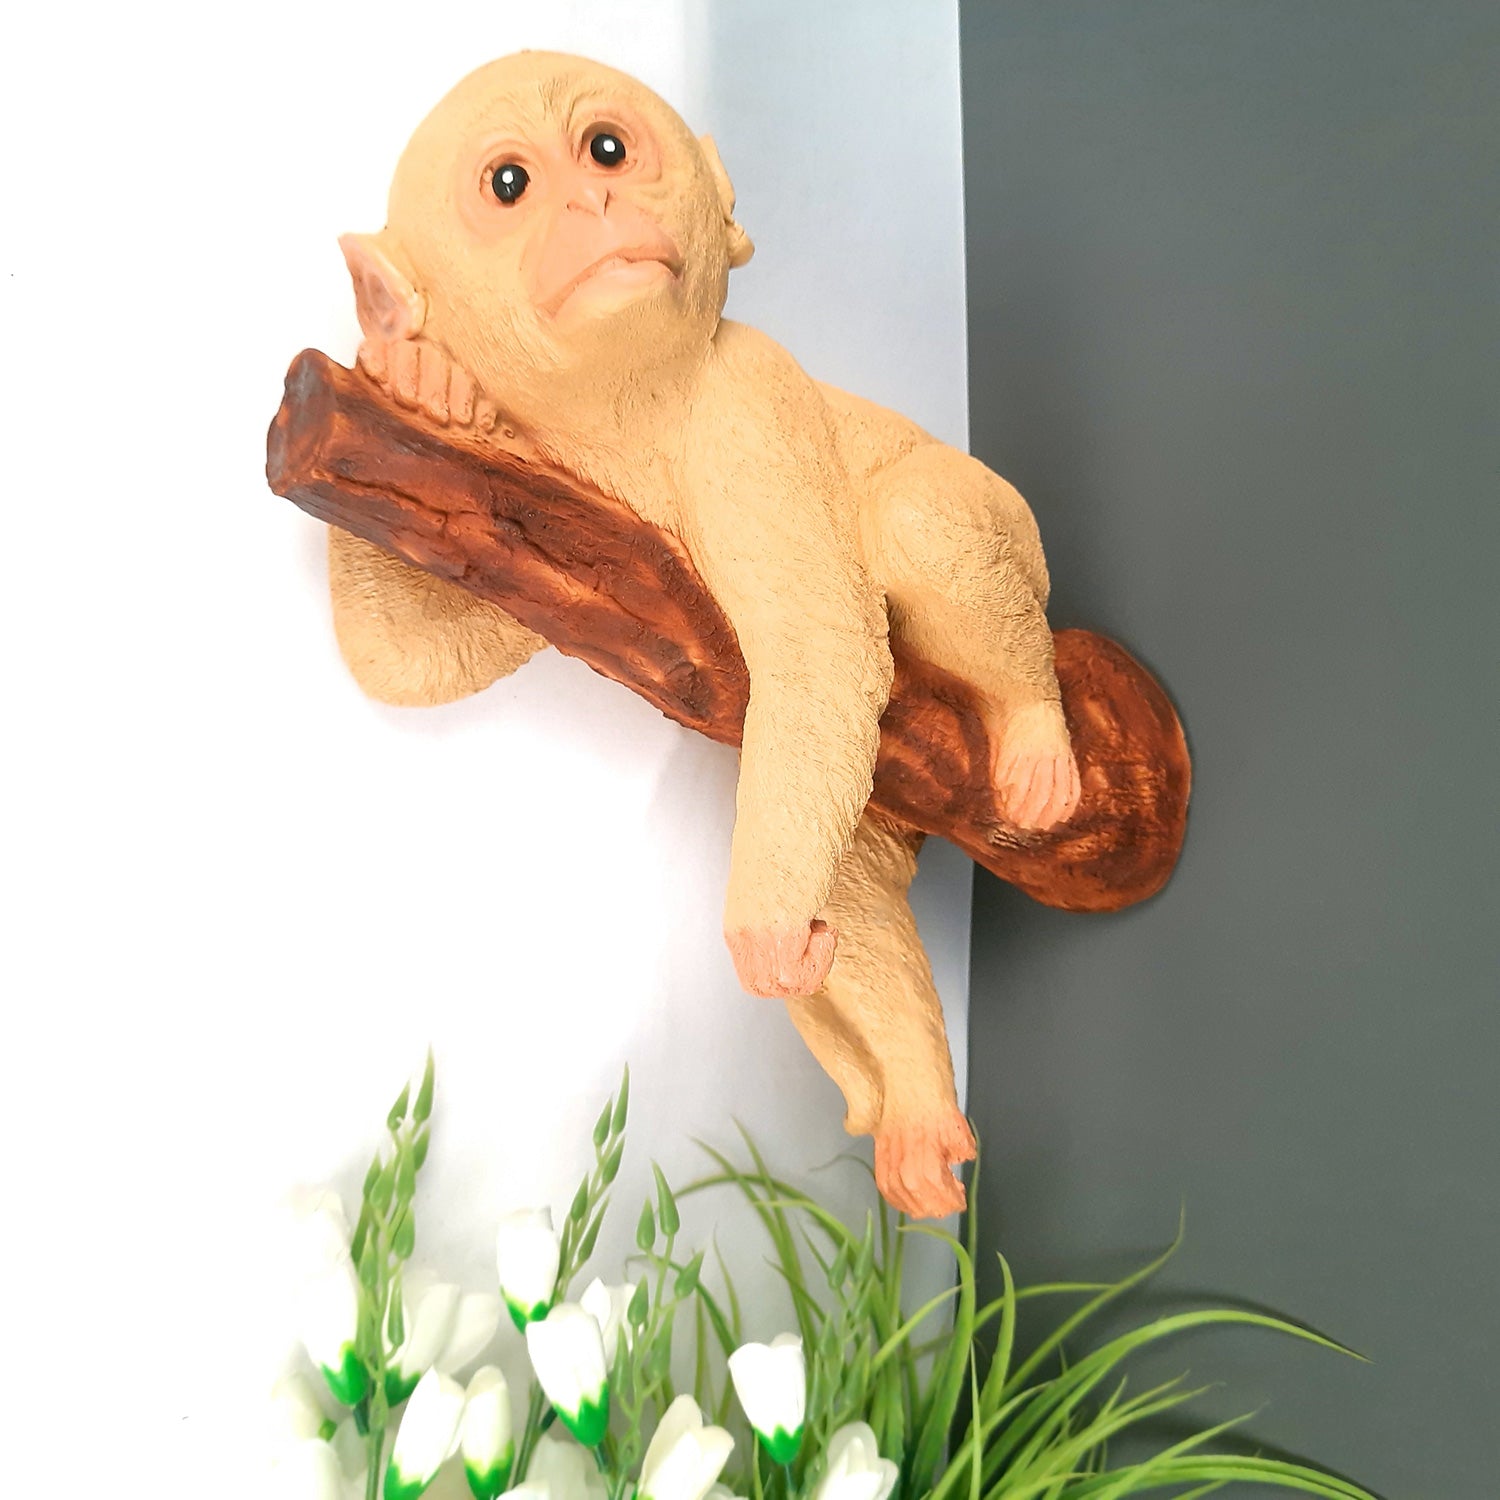 Monkey Hanging on Tree Branch Statue Wall Hanging | Animal Showpiece - For Garden Decor, Home, Living Room, Kids Room & Gifts - 12 Inch - Apkamart